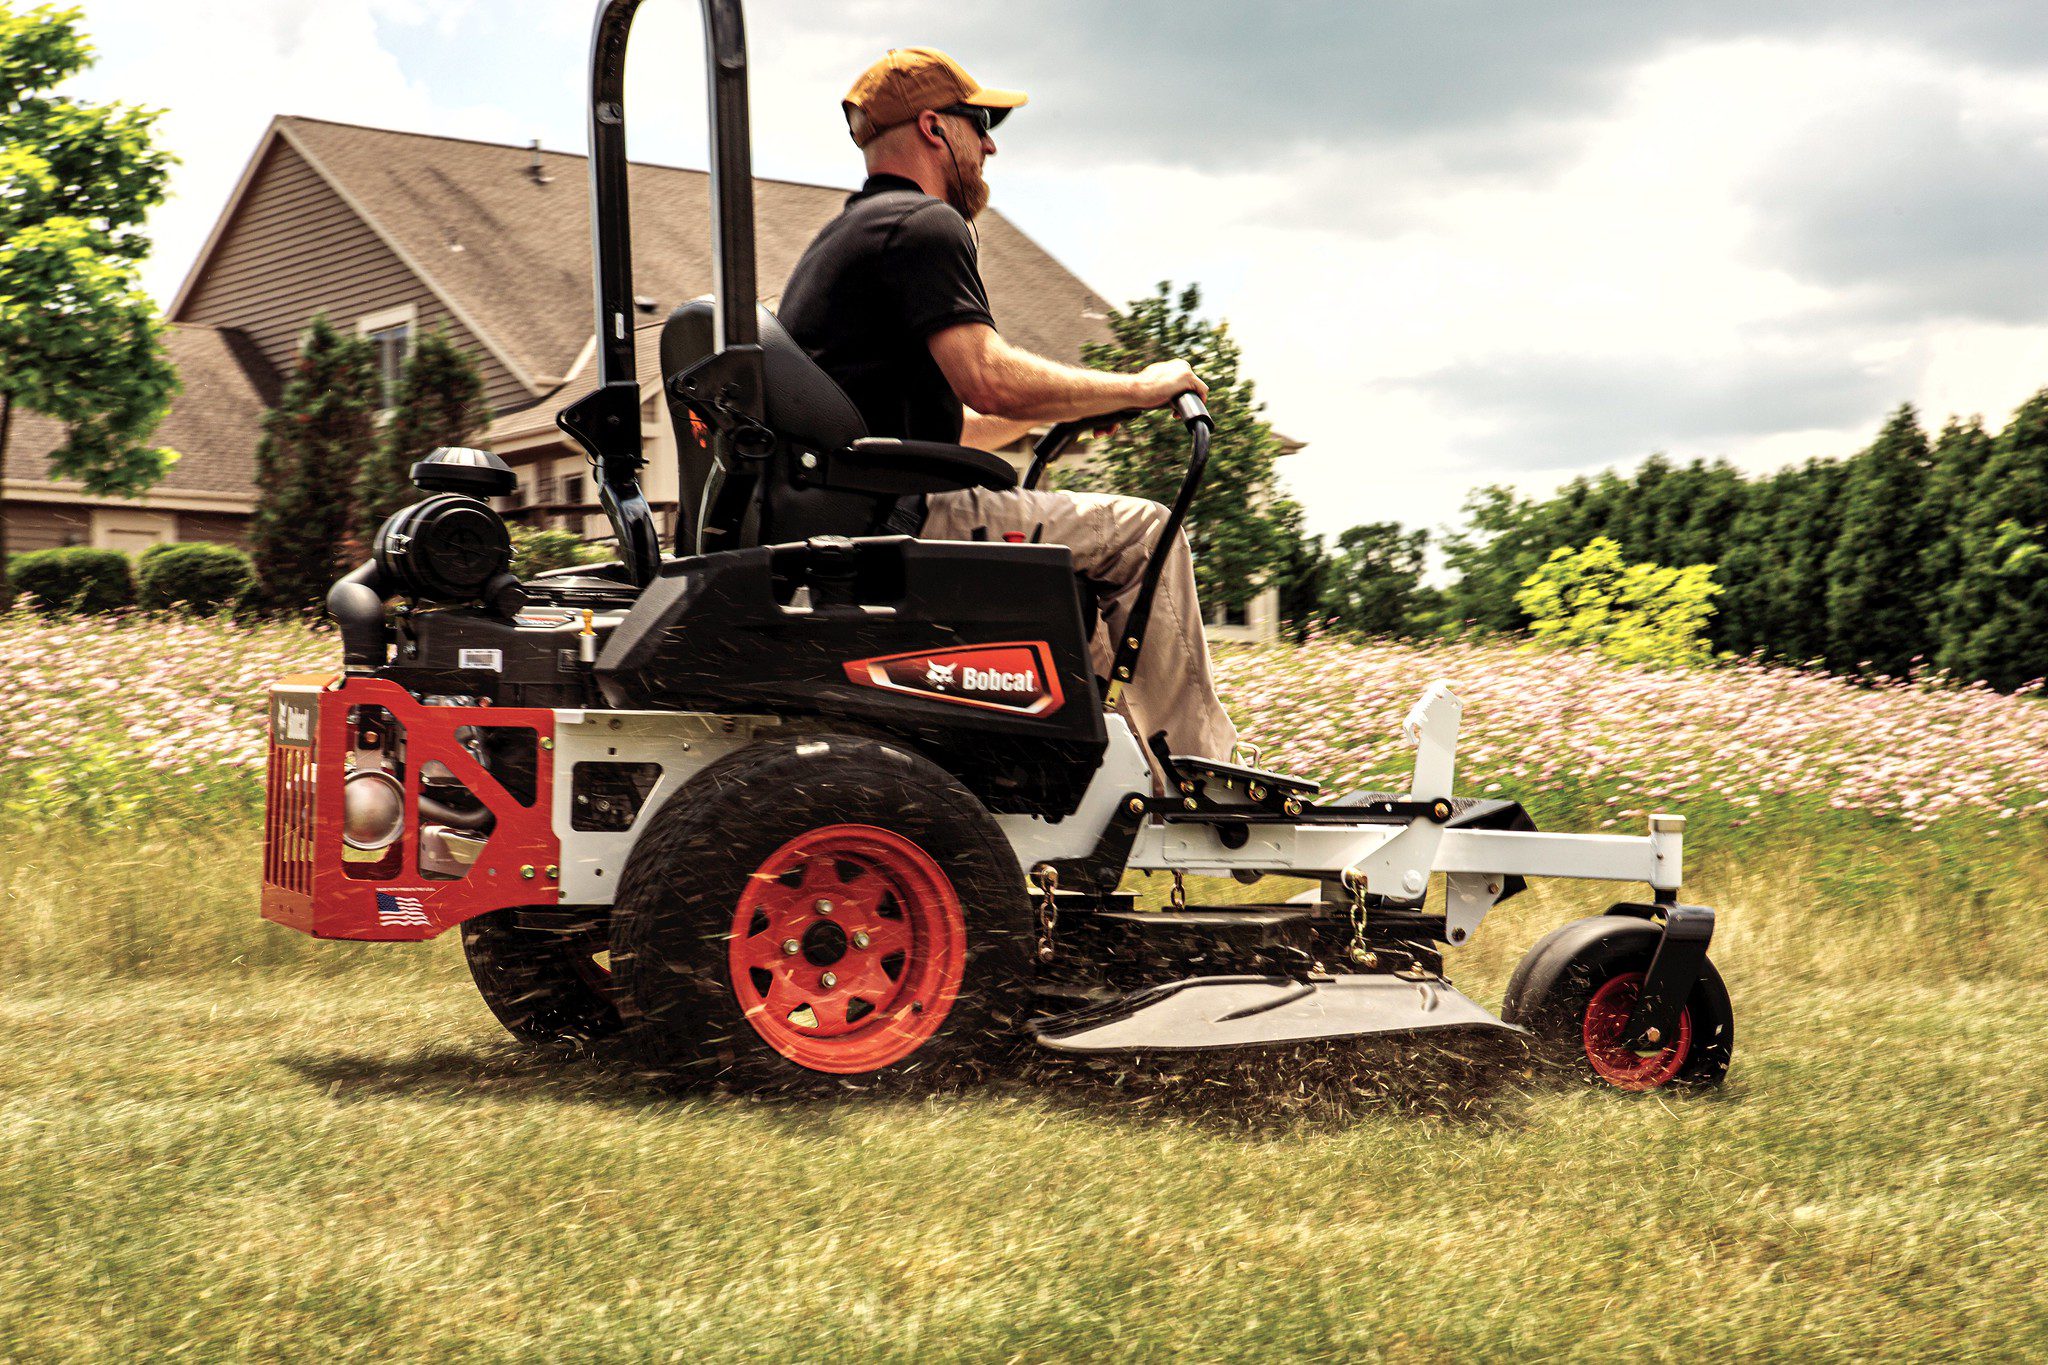 Browse Specs and more for the Bobcat ZT3500 Zero-Turn Mower 61″ - Bobcat of Houston